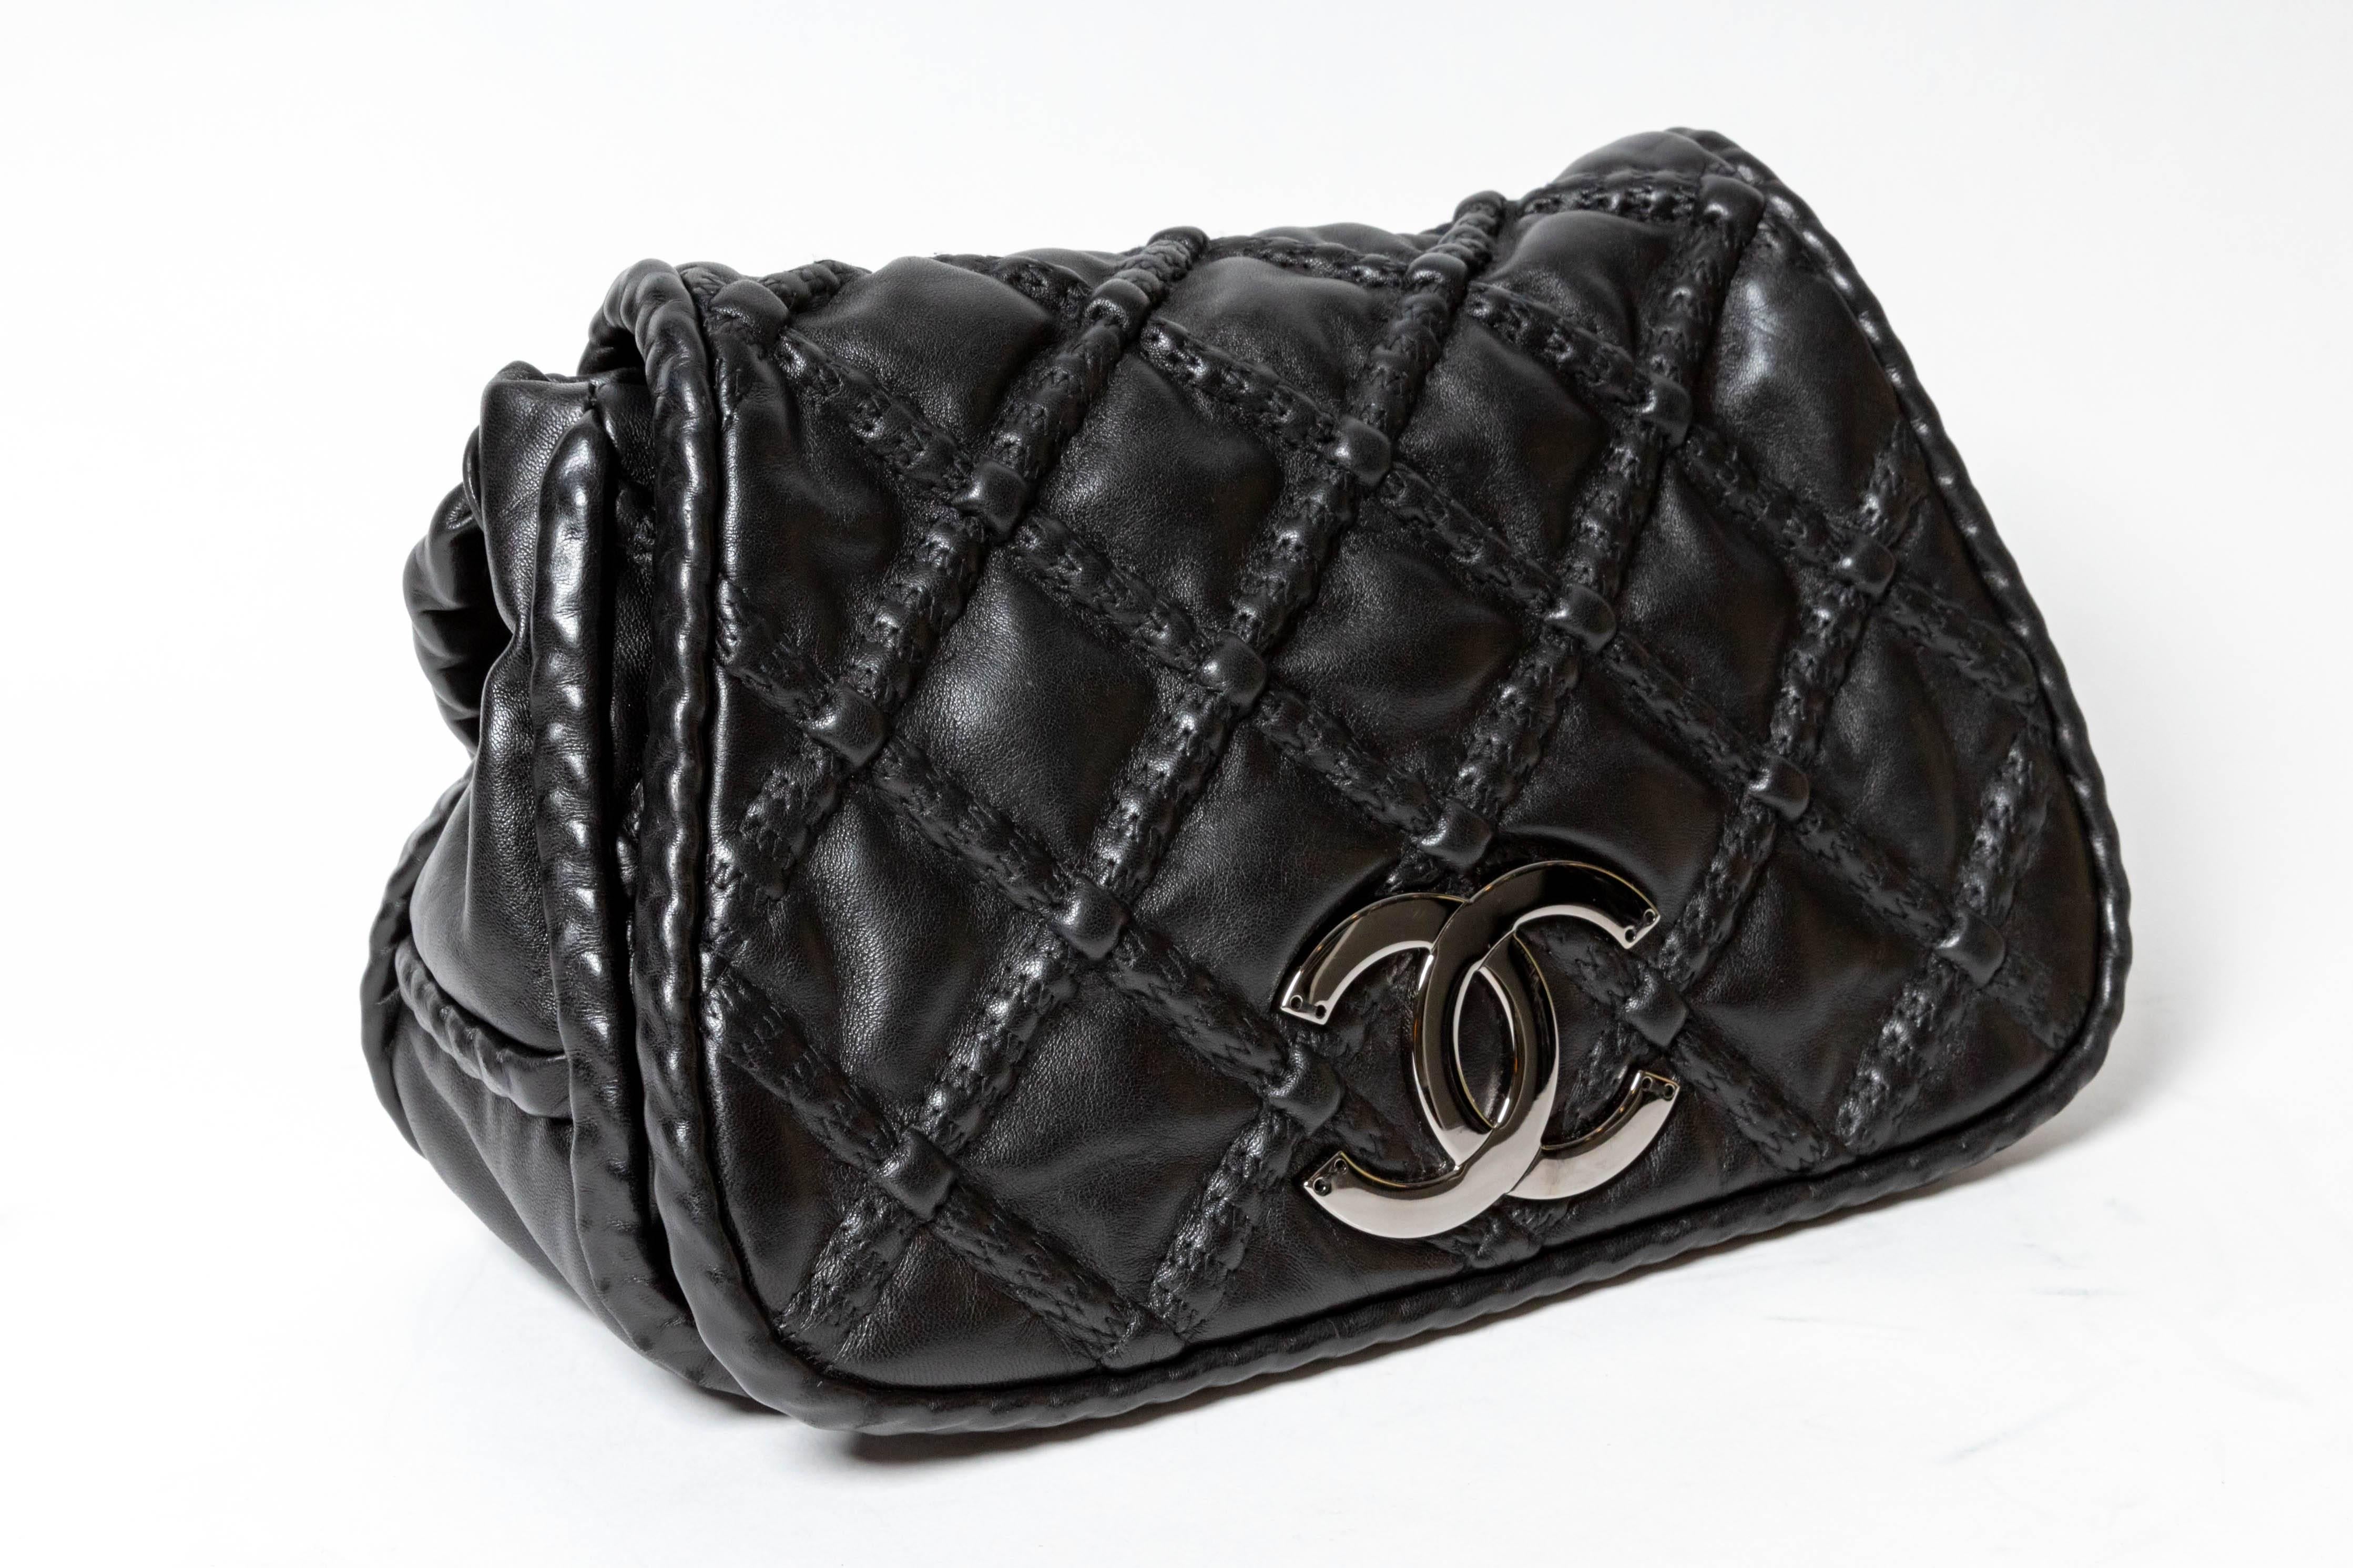 Chanel Covered Chain Lambskin Shoulder Bag in Black with Rhodium Hardware 1